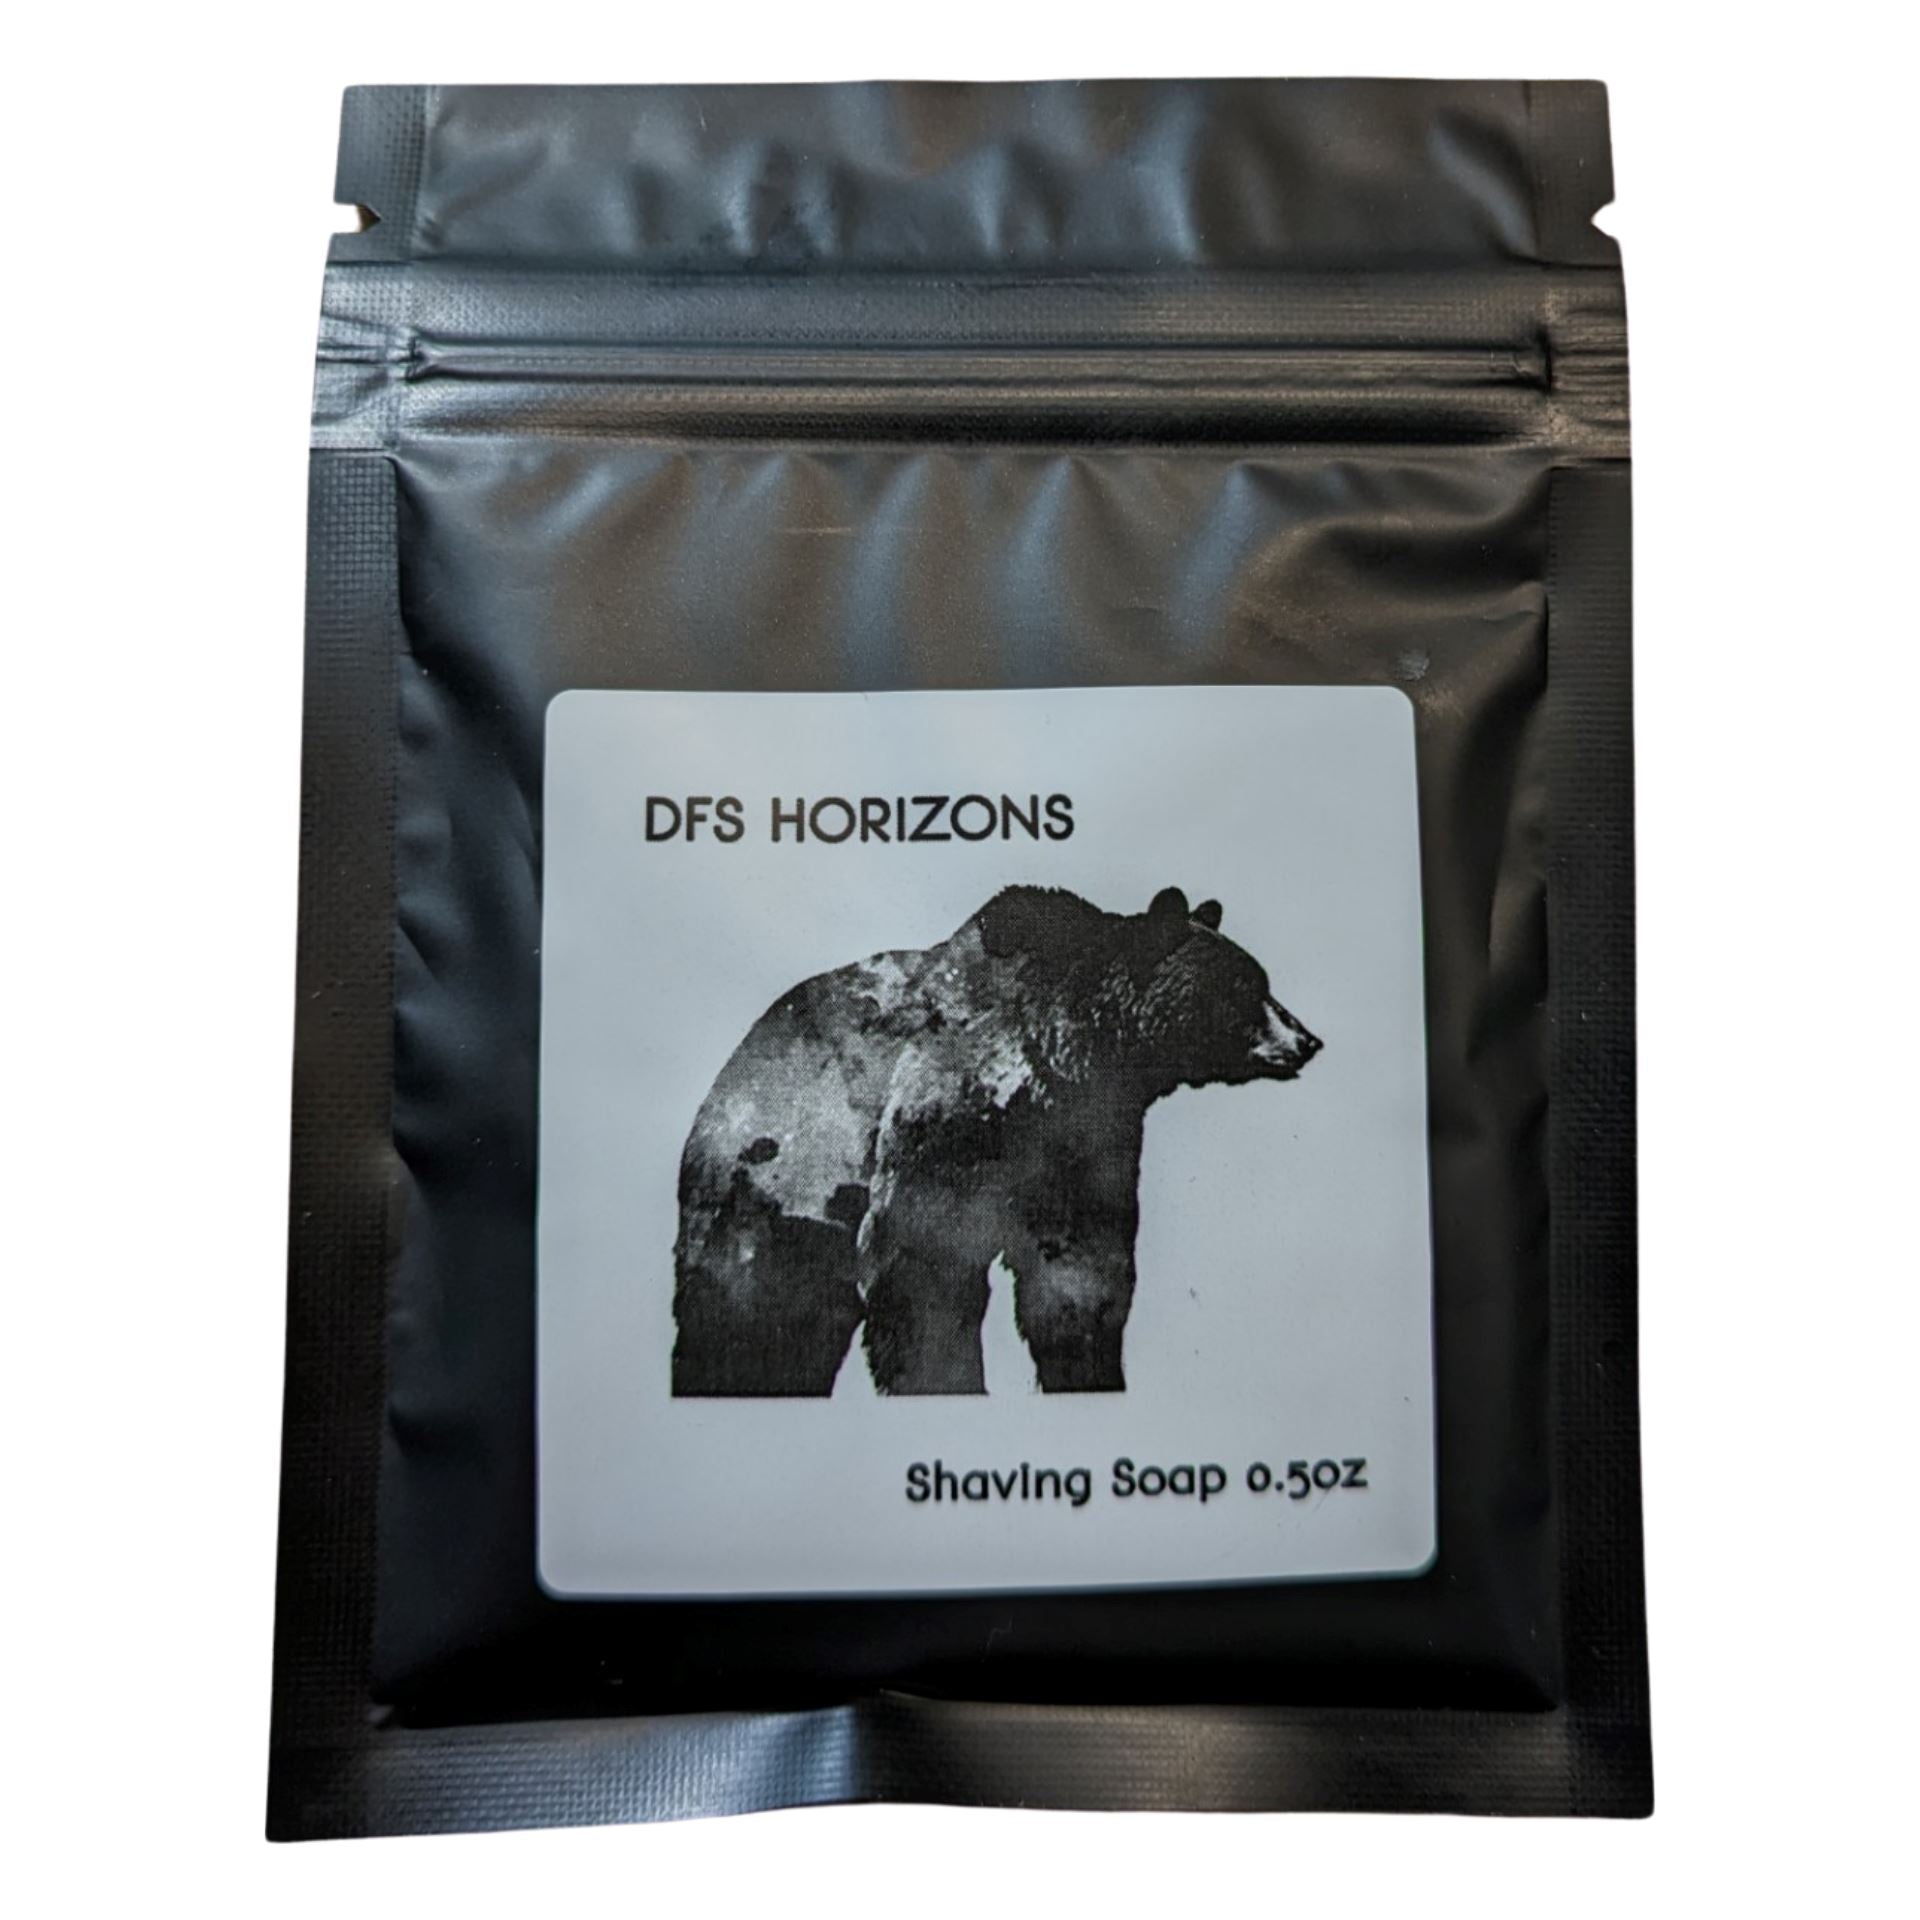 DFS Horizons Shaving Soap - by Murphy and McNeil / Black Mountain Shaving Shaving Soap Murphy and McNeil Store Shaving Soap Sample 0.5oz 